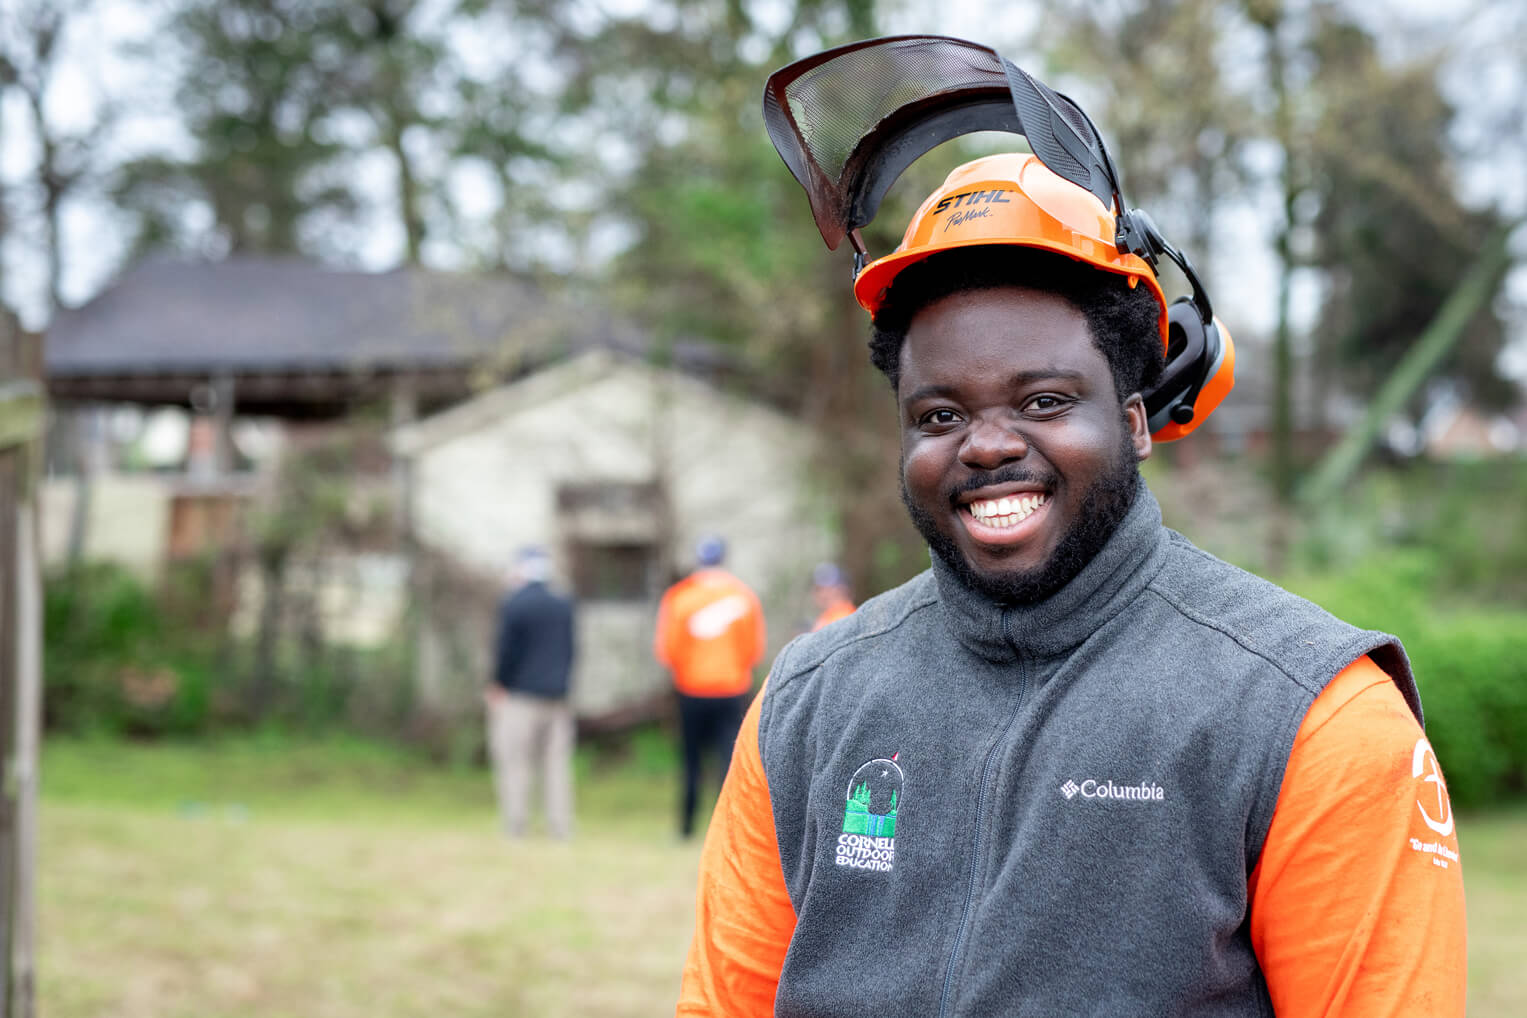 Recent Cornell University graduate Glenn Asuo-Asante joined students in Memphis where he applied chainsaw skills to clear trees from a yard.